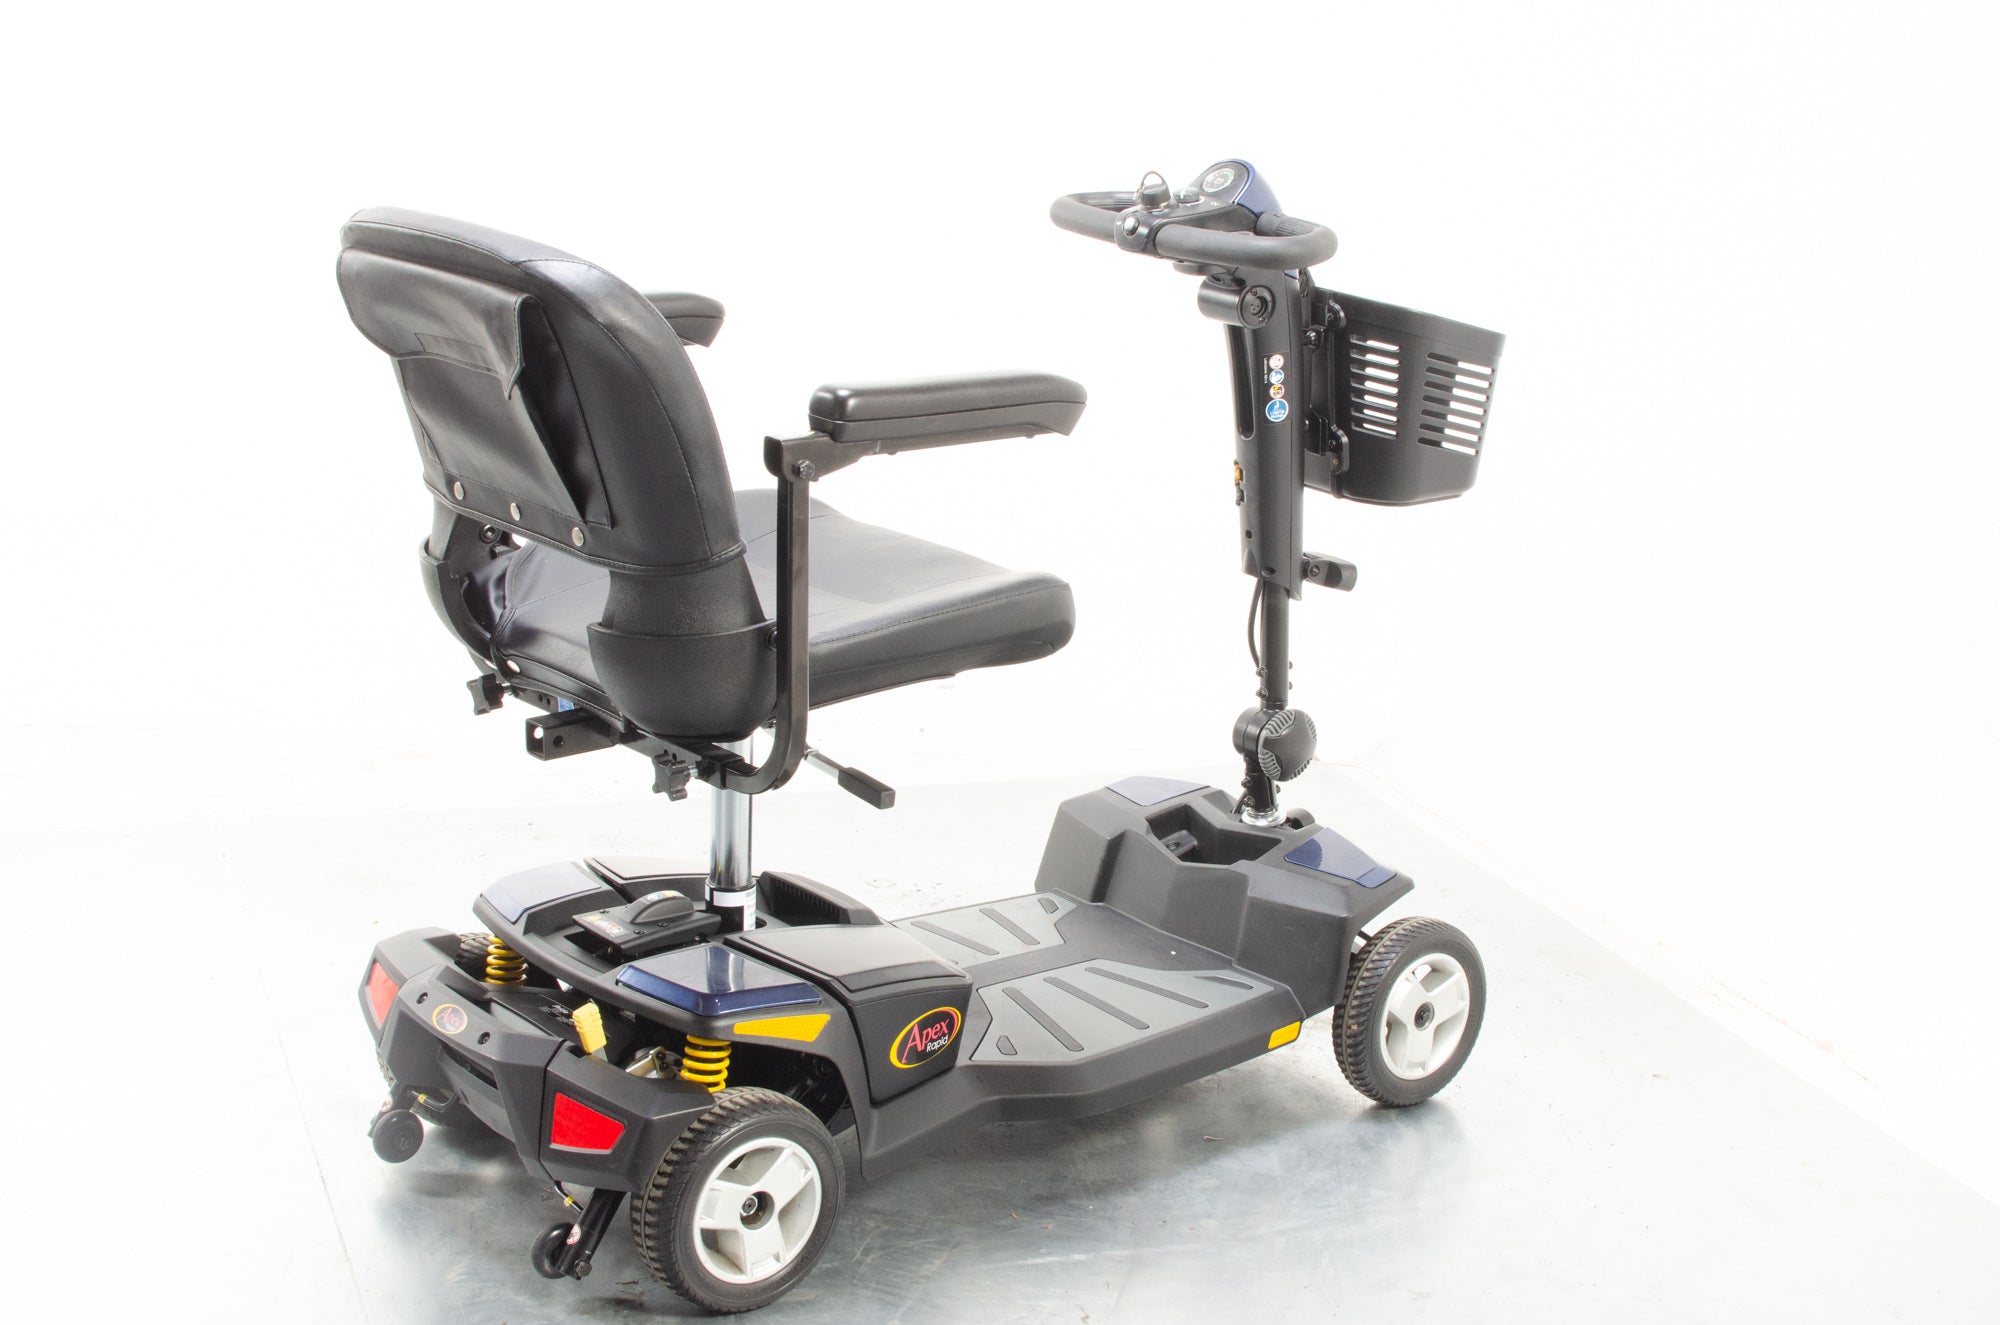 Pride Apex Rapid Used Electric Mobility Scooter Small Transportable Suspension Boot Portable